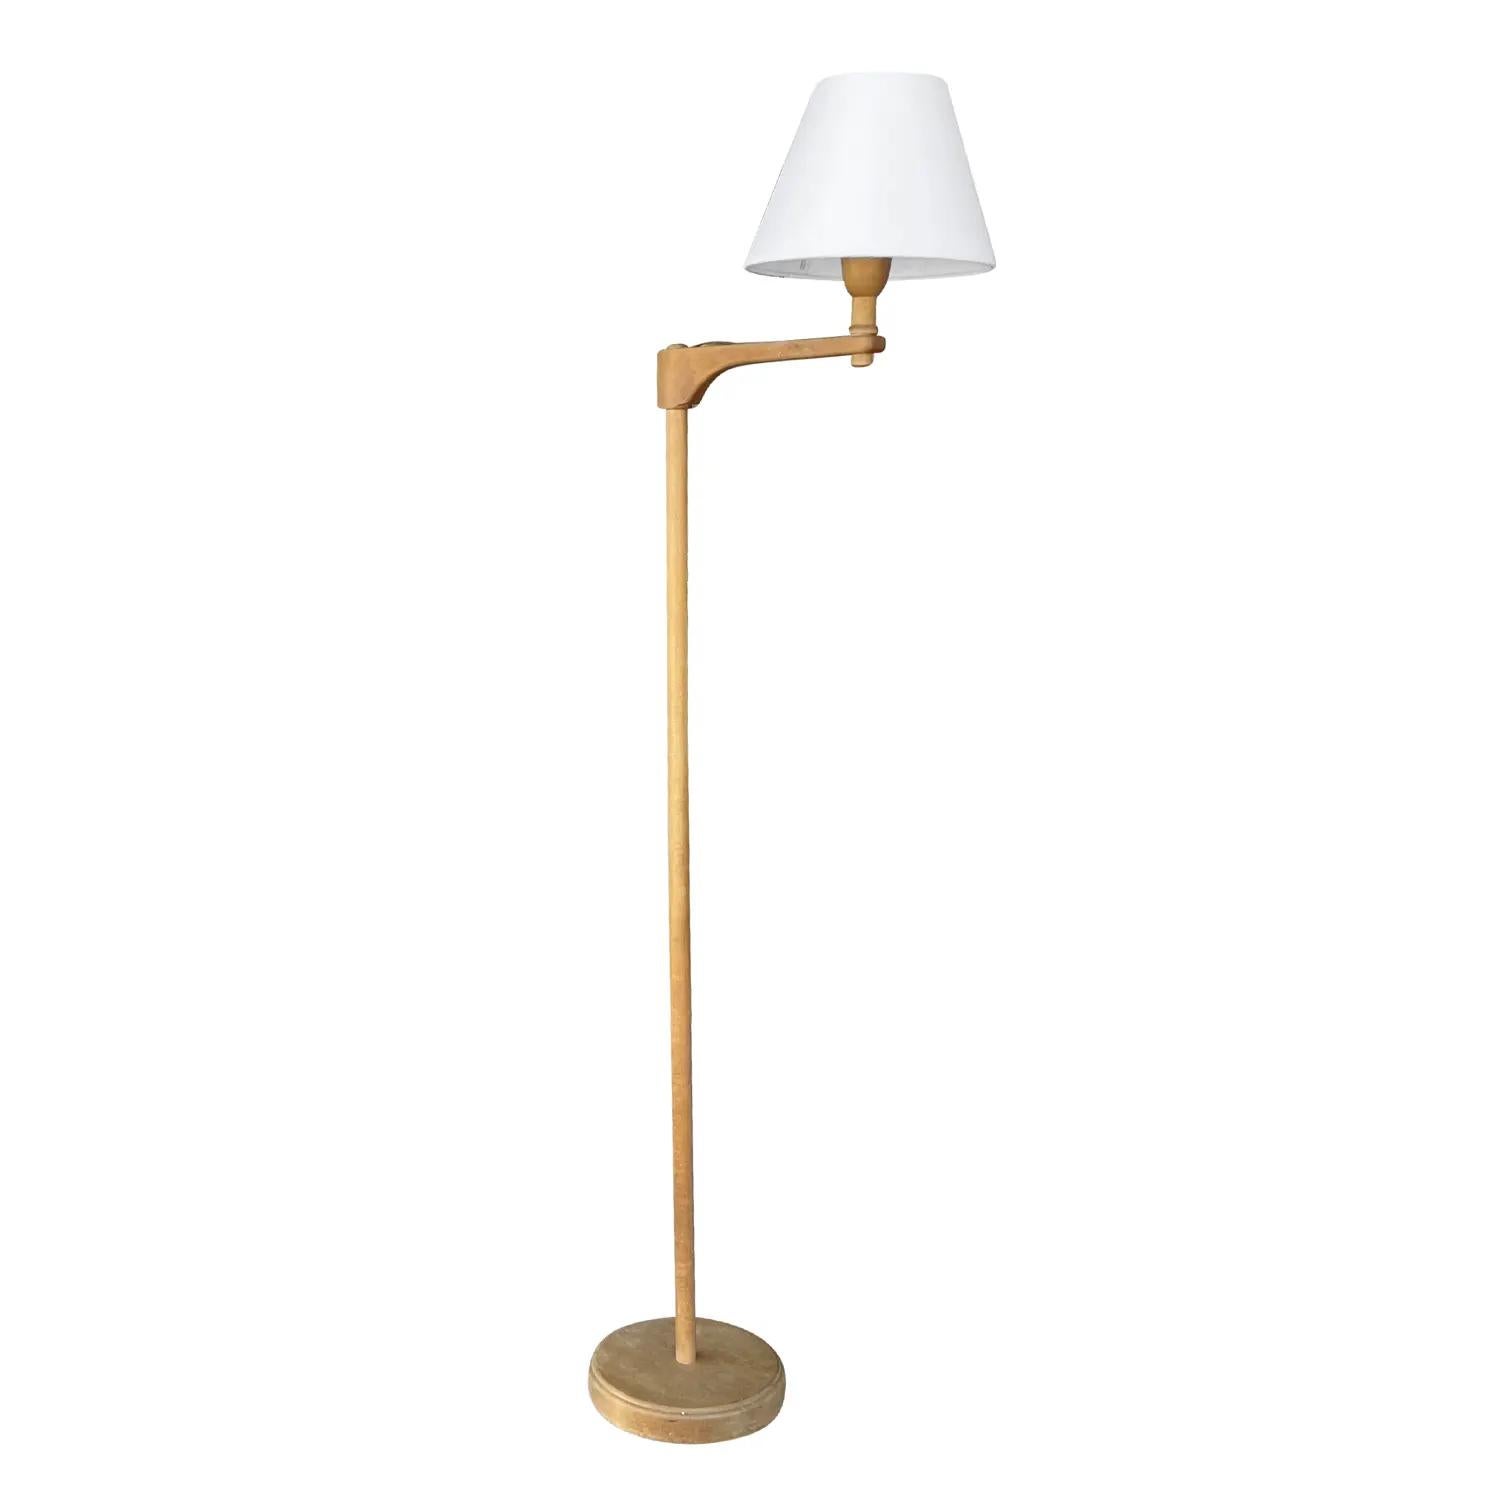 A light-brown, antique Swedish Gustavian Staken, floor lamp made of hand crafted Walnut, designed by Carl Malmsten in good condition. The Scandinavian reading lamp is composed with a new small round white shade attached to a flexible, adjustable